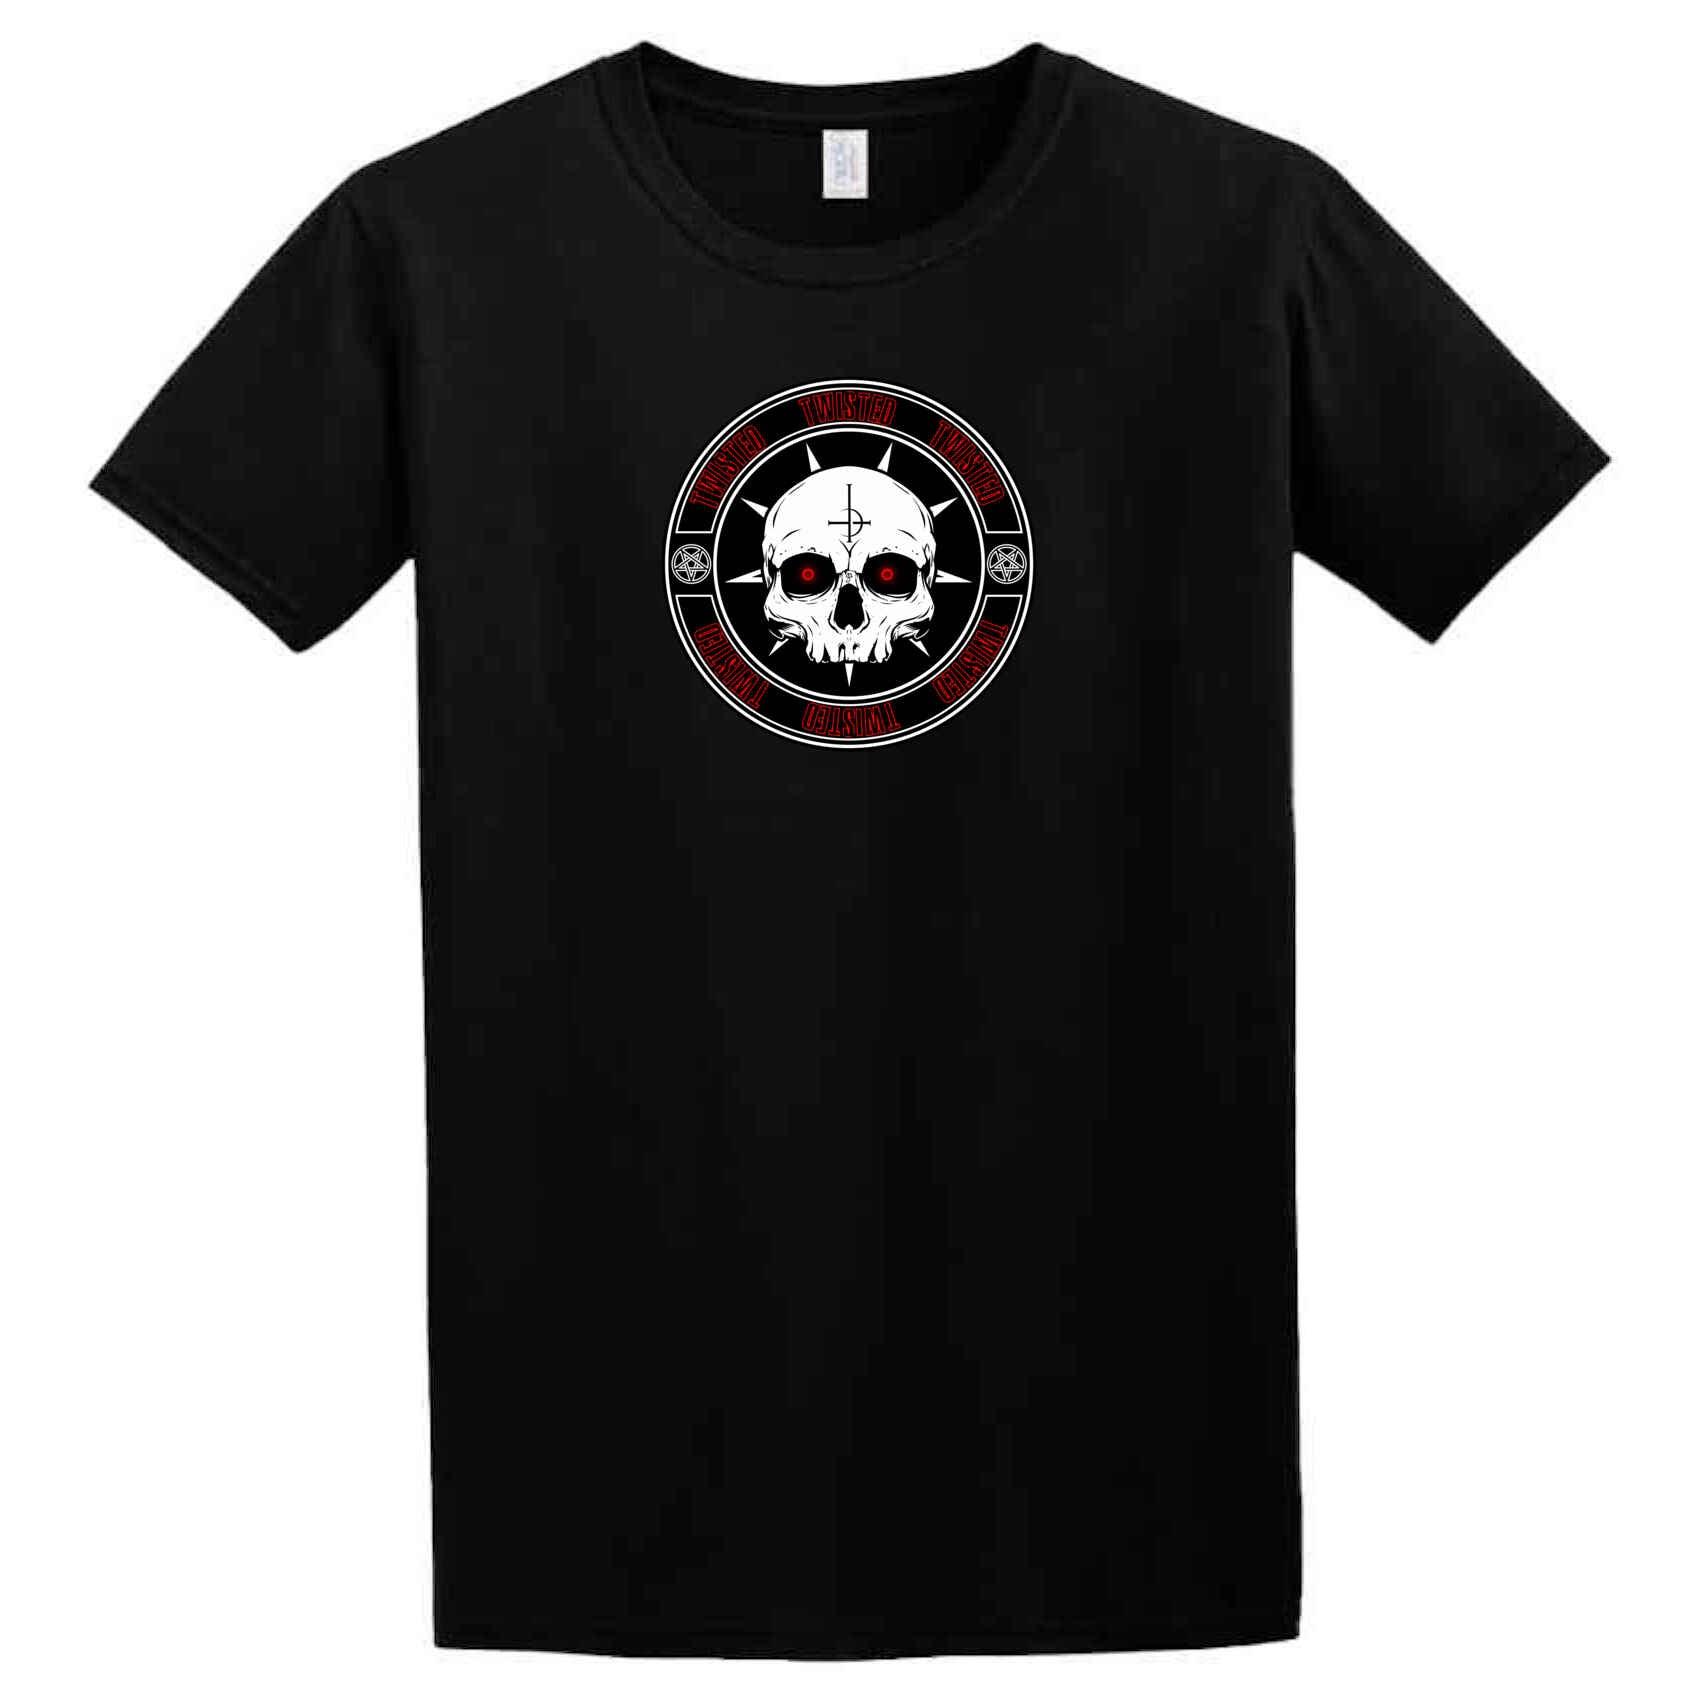 A Twisted Skull T-Shirt from Twisted Gifts.